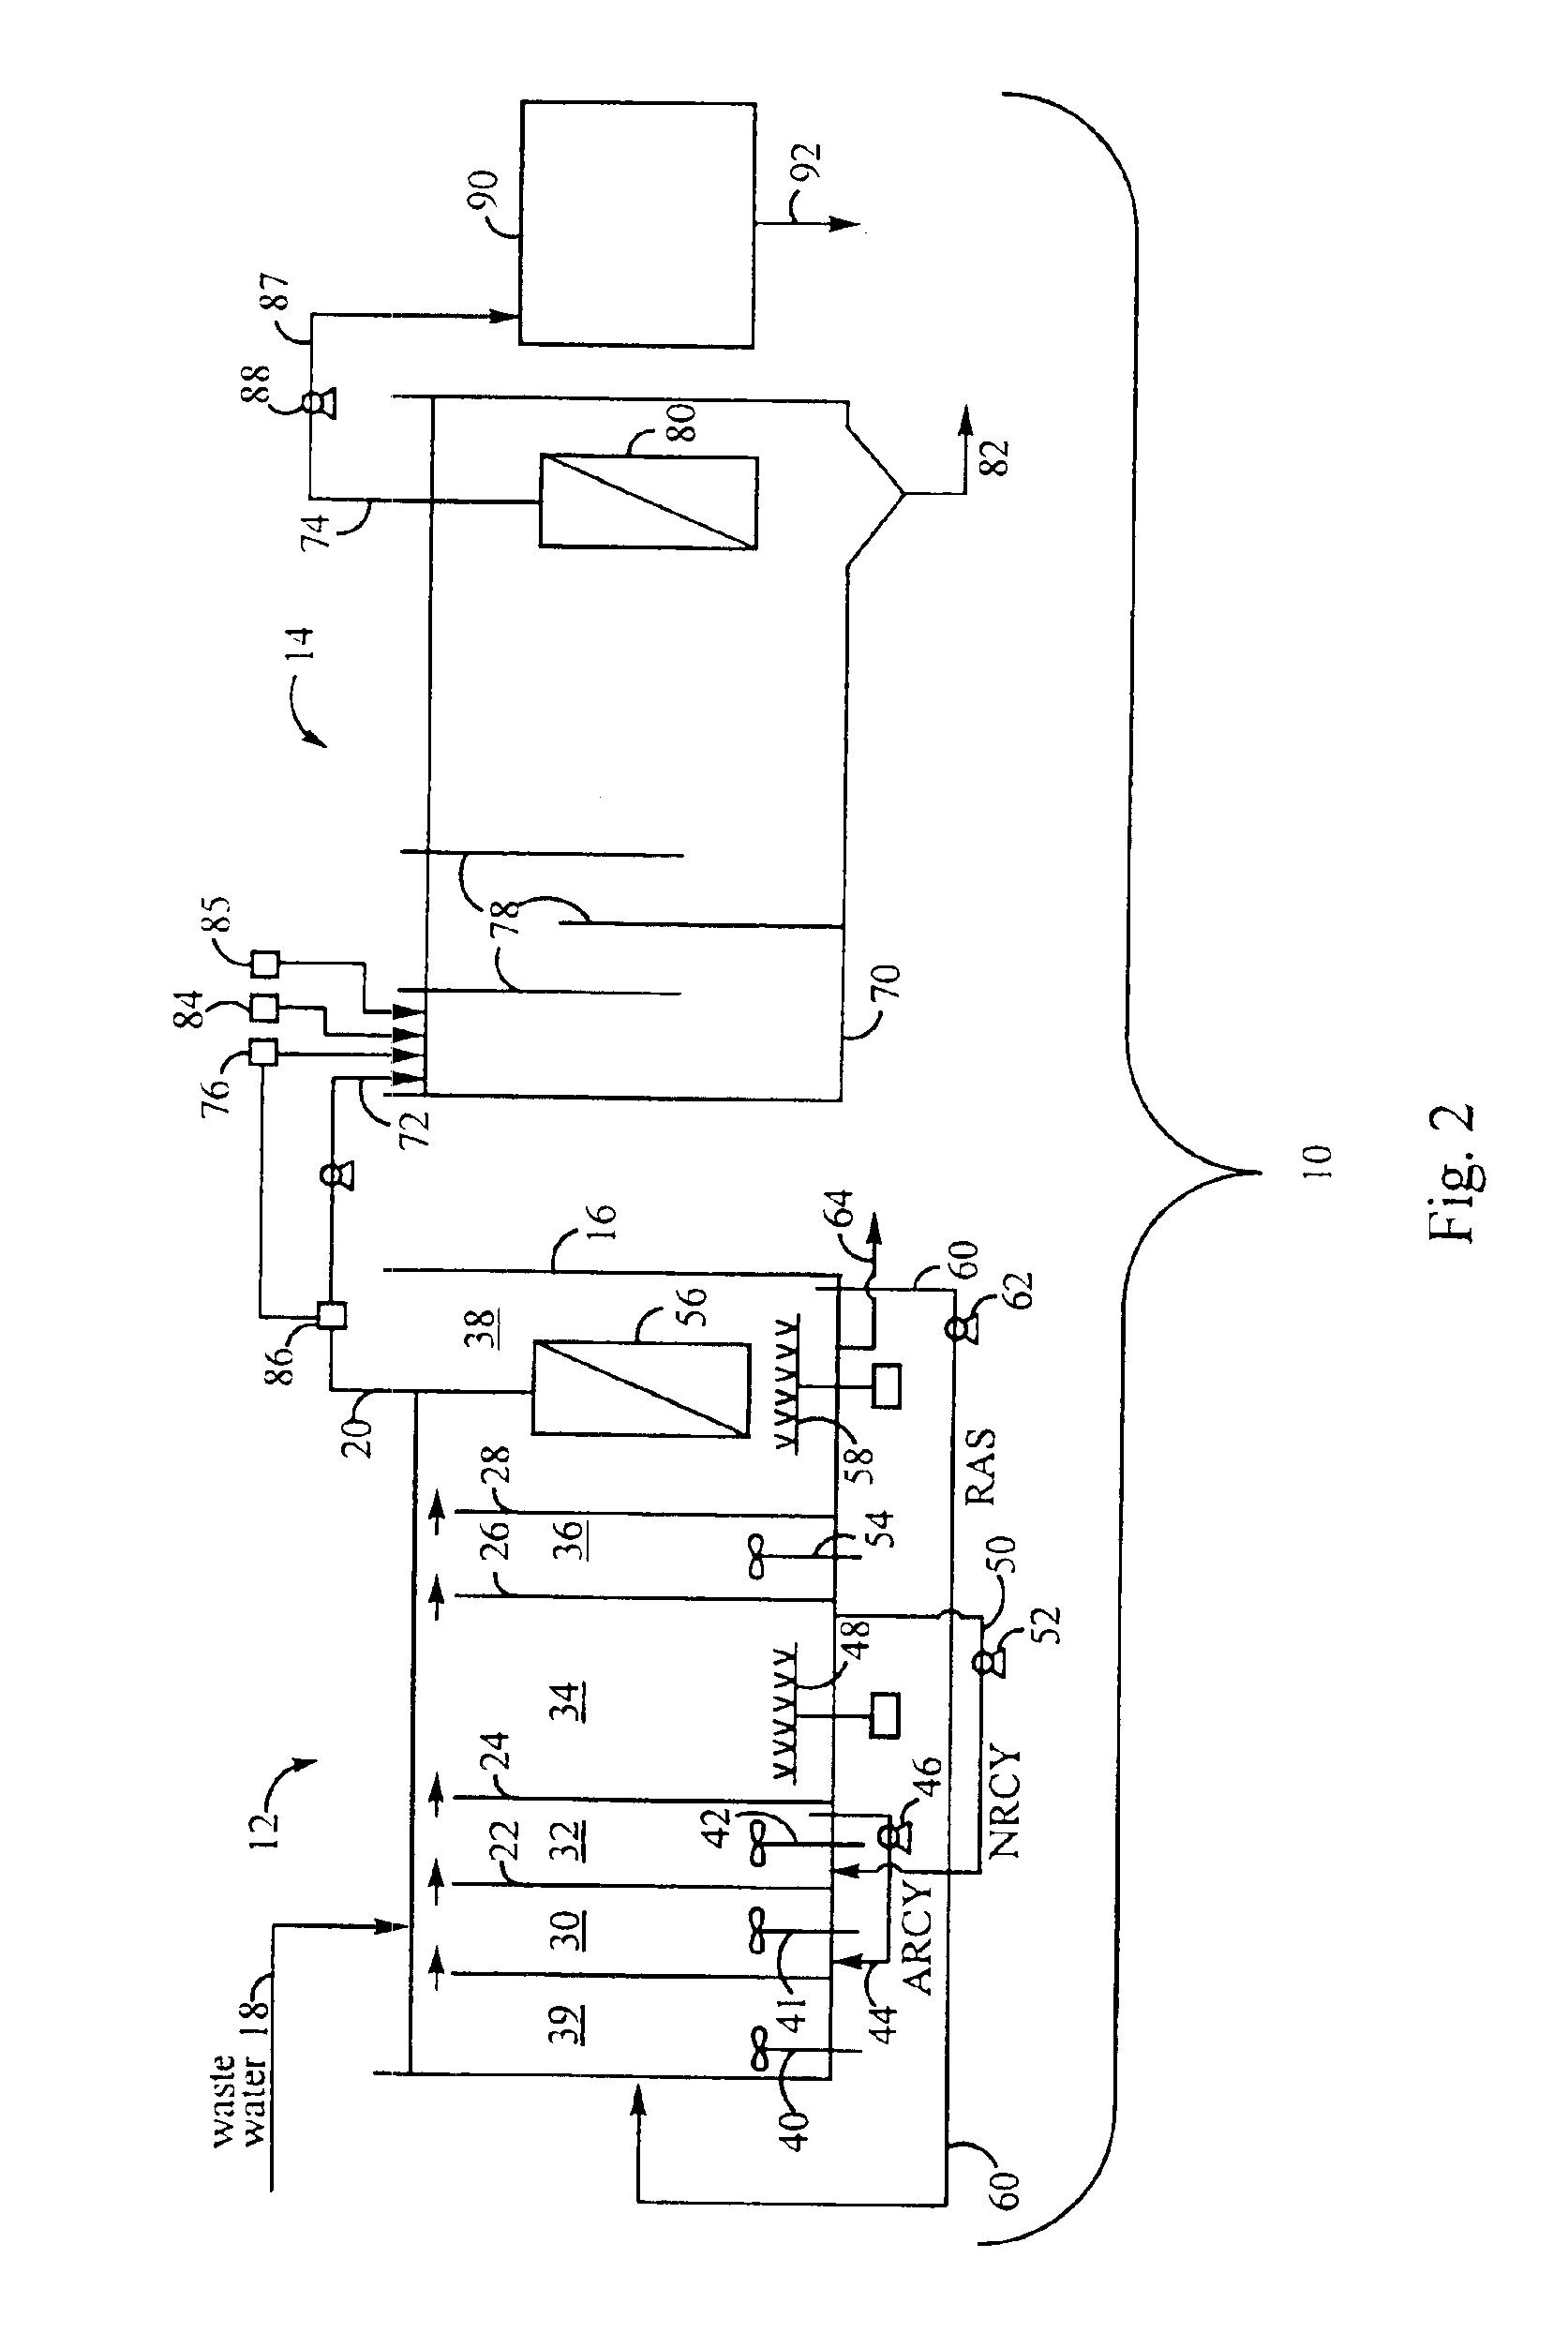 Method and apparatus for treating wastewater using membrane filters